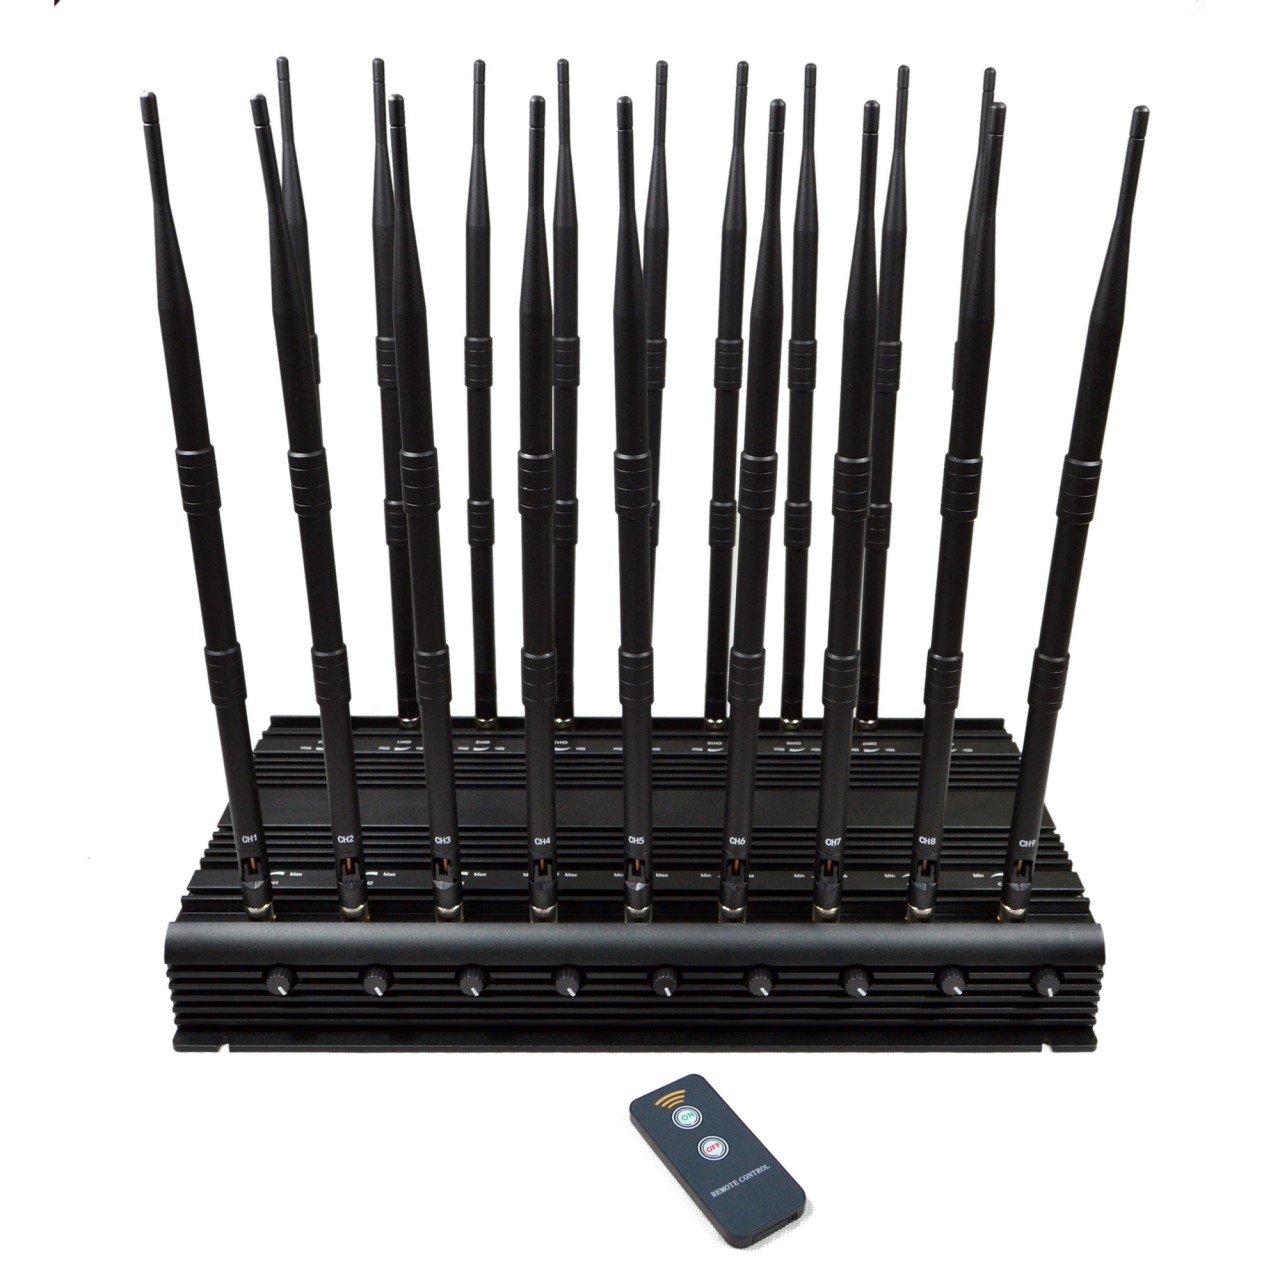 High Power Conference rooms Jamming devices